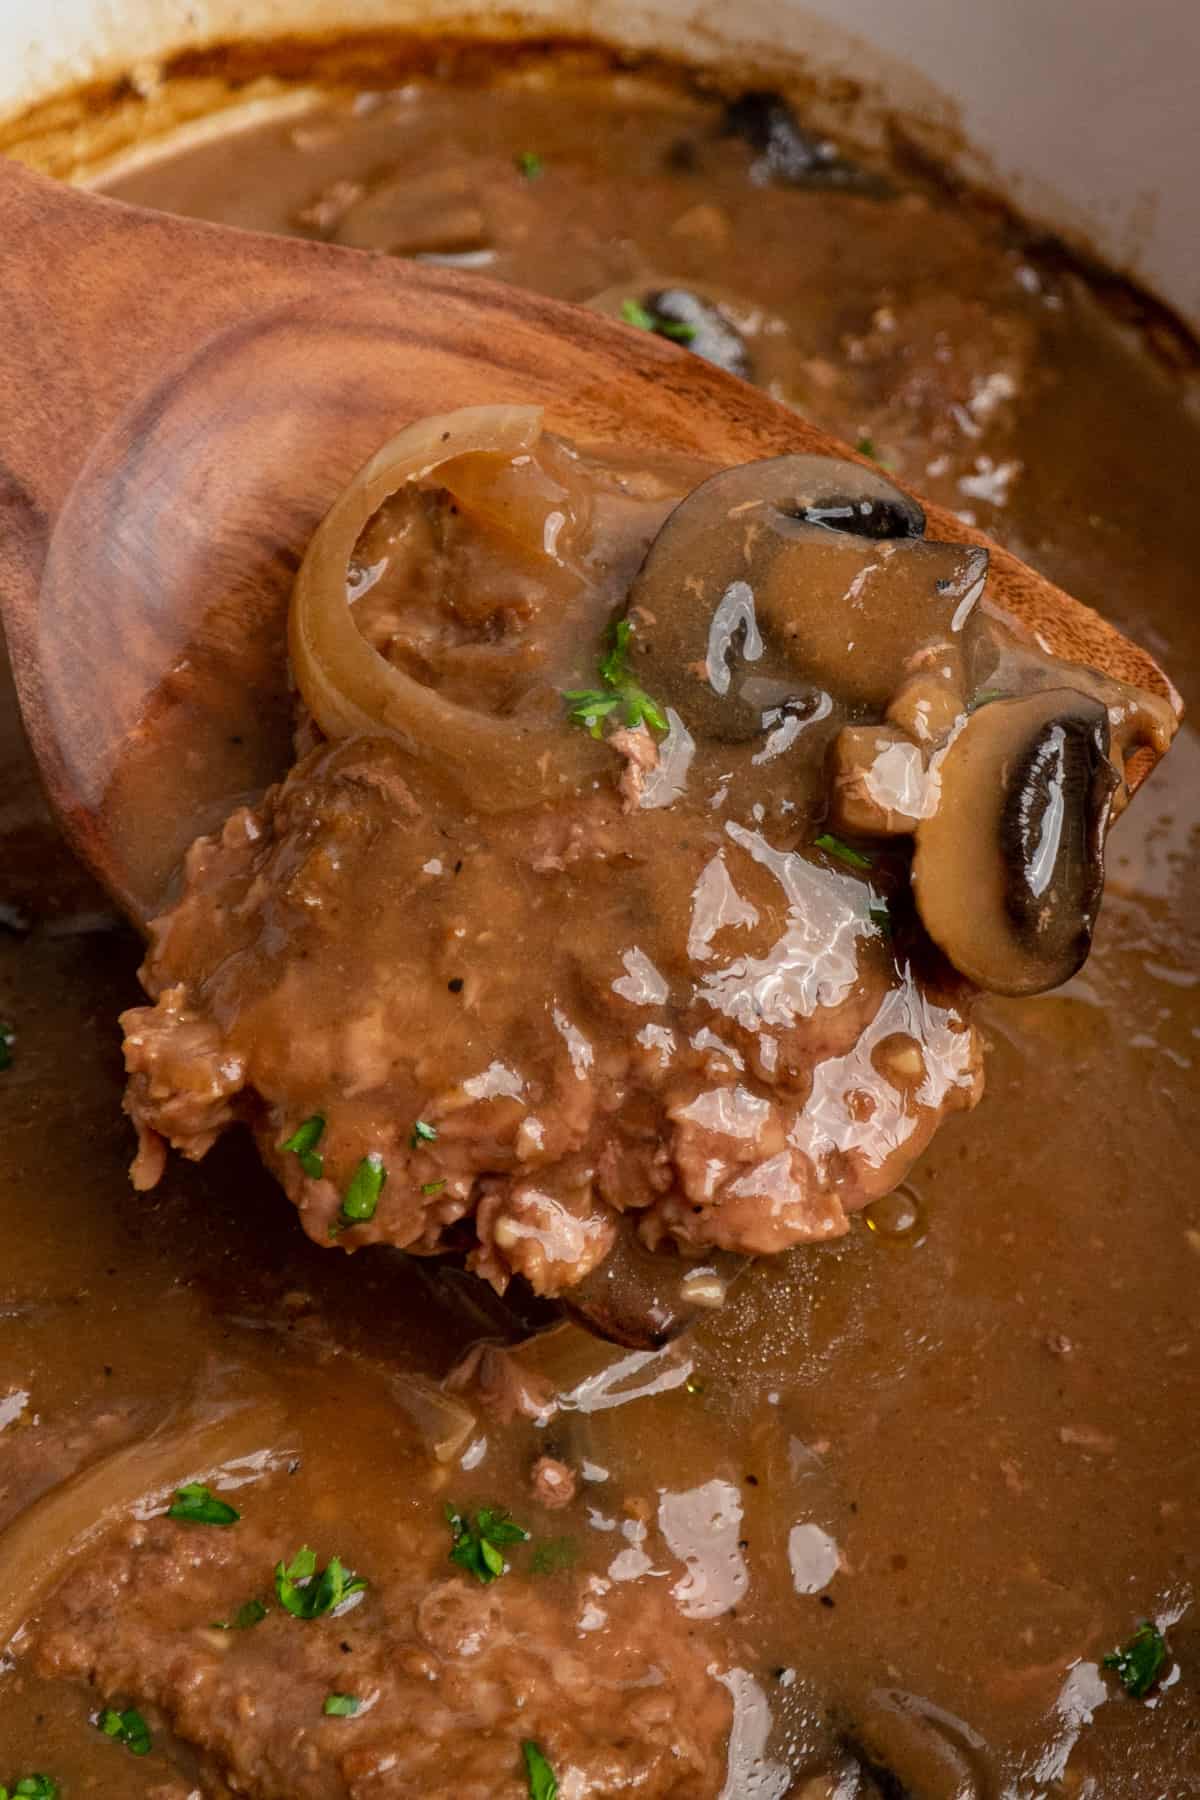 A wooden spoon holding a piece of cube steak with gravy and mushrooms.